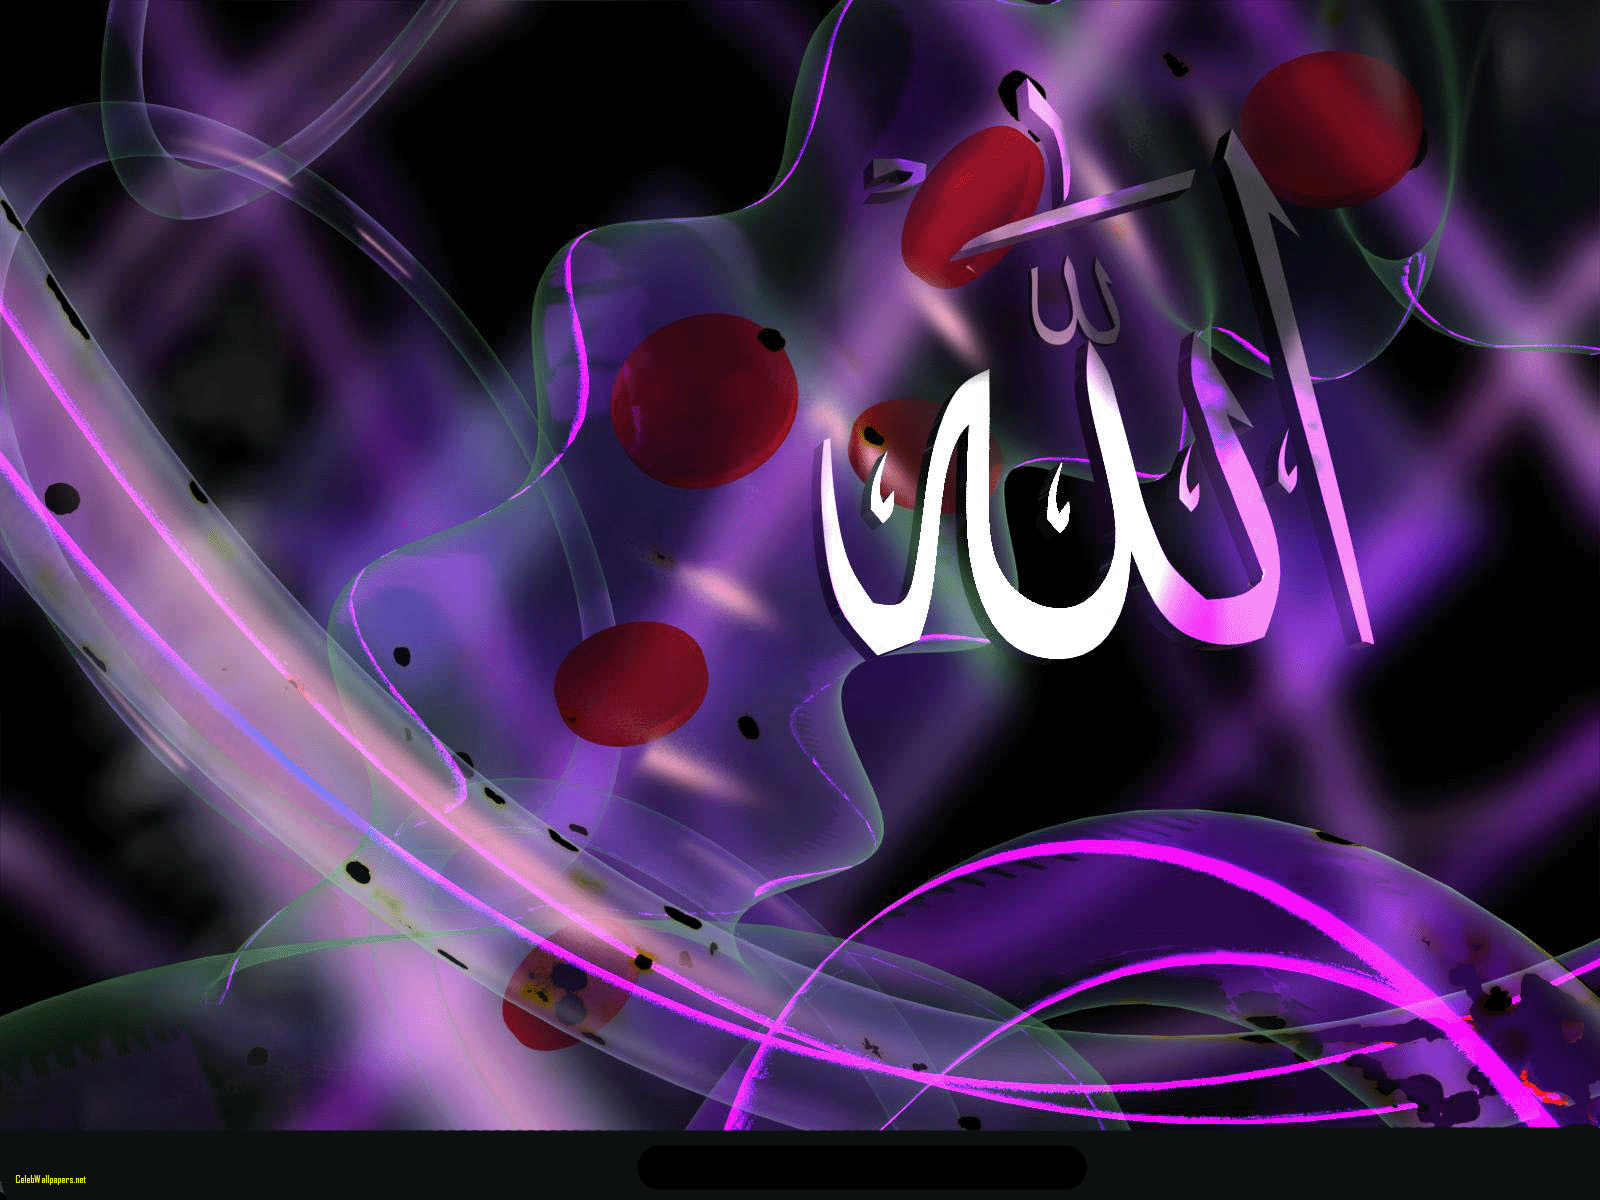 Allah Pictures Wallpapers - Wallpaper Cave